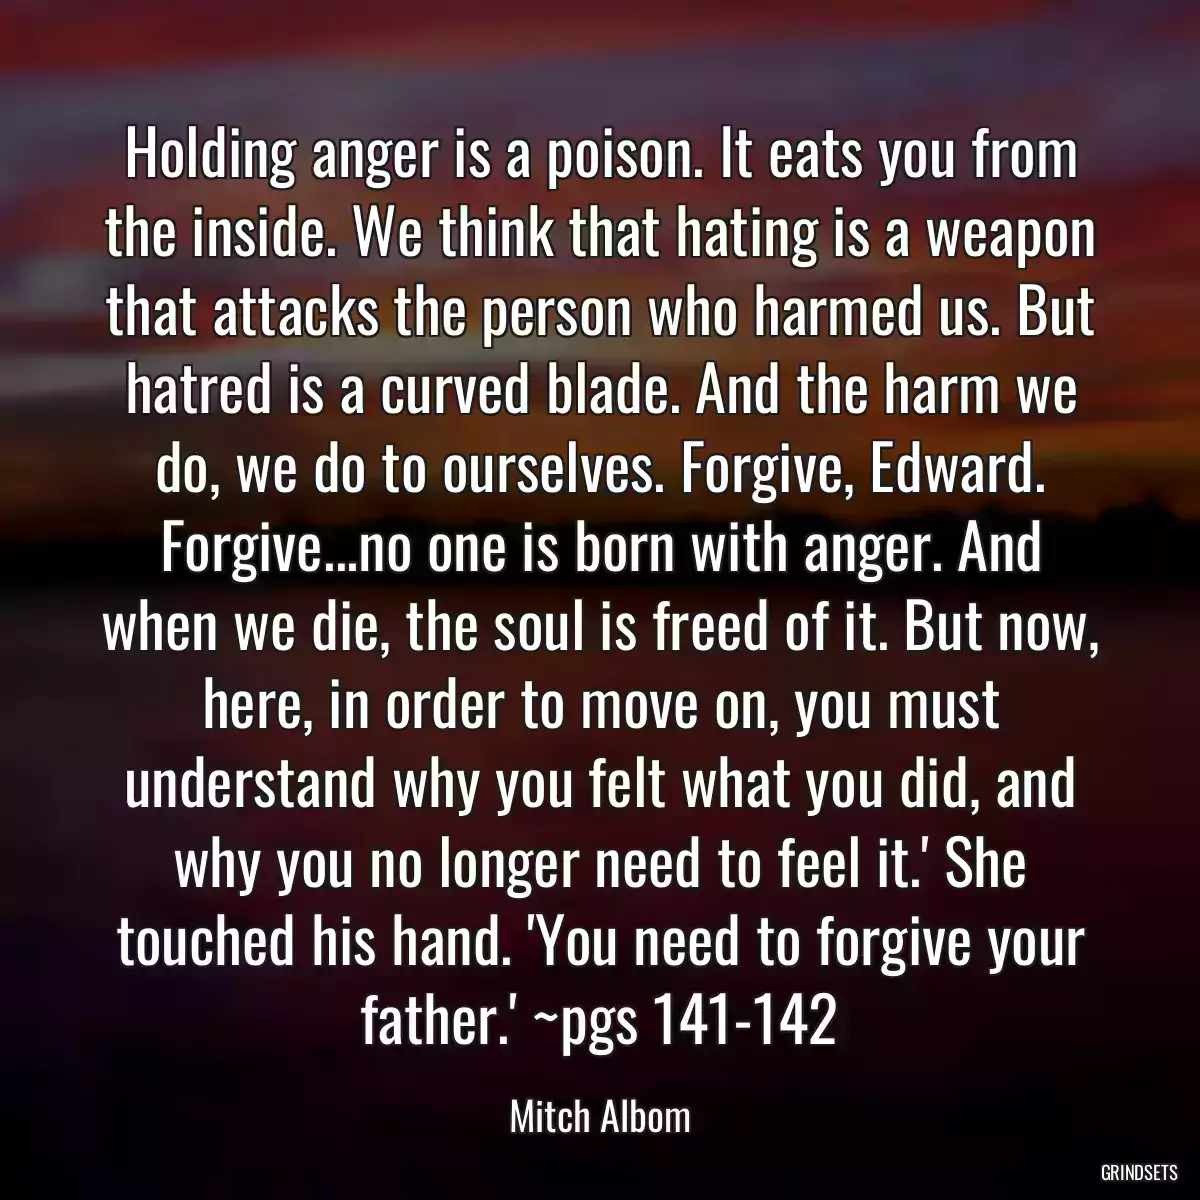 Holding anger is a poison. It eats you from the inside. We think that hating is a weapon that attacks the person who harmed us. But hatred is a curved blade. And the harm we do, we do to ourselves. Forgive, Edward. Forgive...no one is born with anger. And when we die, the soul is freed of it. But now, here, in order to move on, you must understand why you felt what you did, and why you no longer need to feel it.\' She touched his hand. \'You need to forgive your father.\' ~pgs 141-142